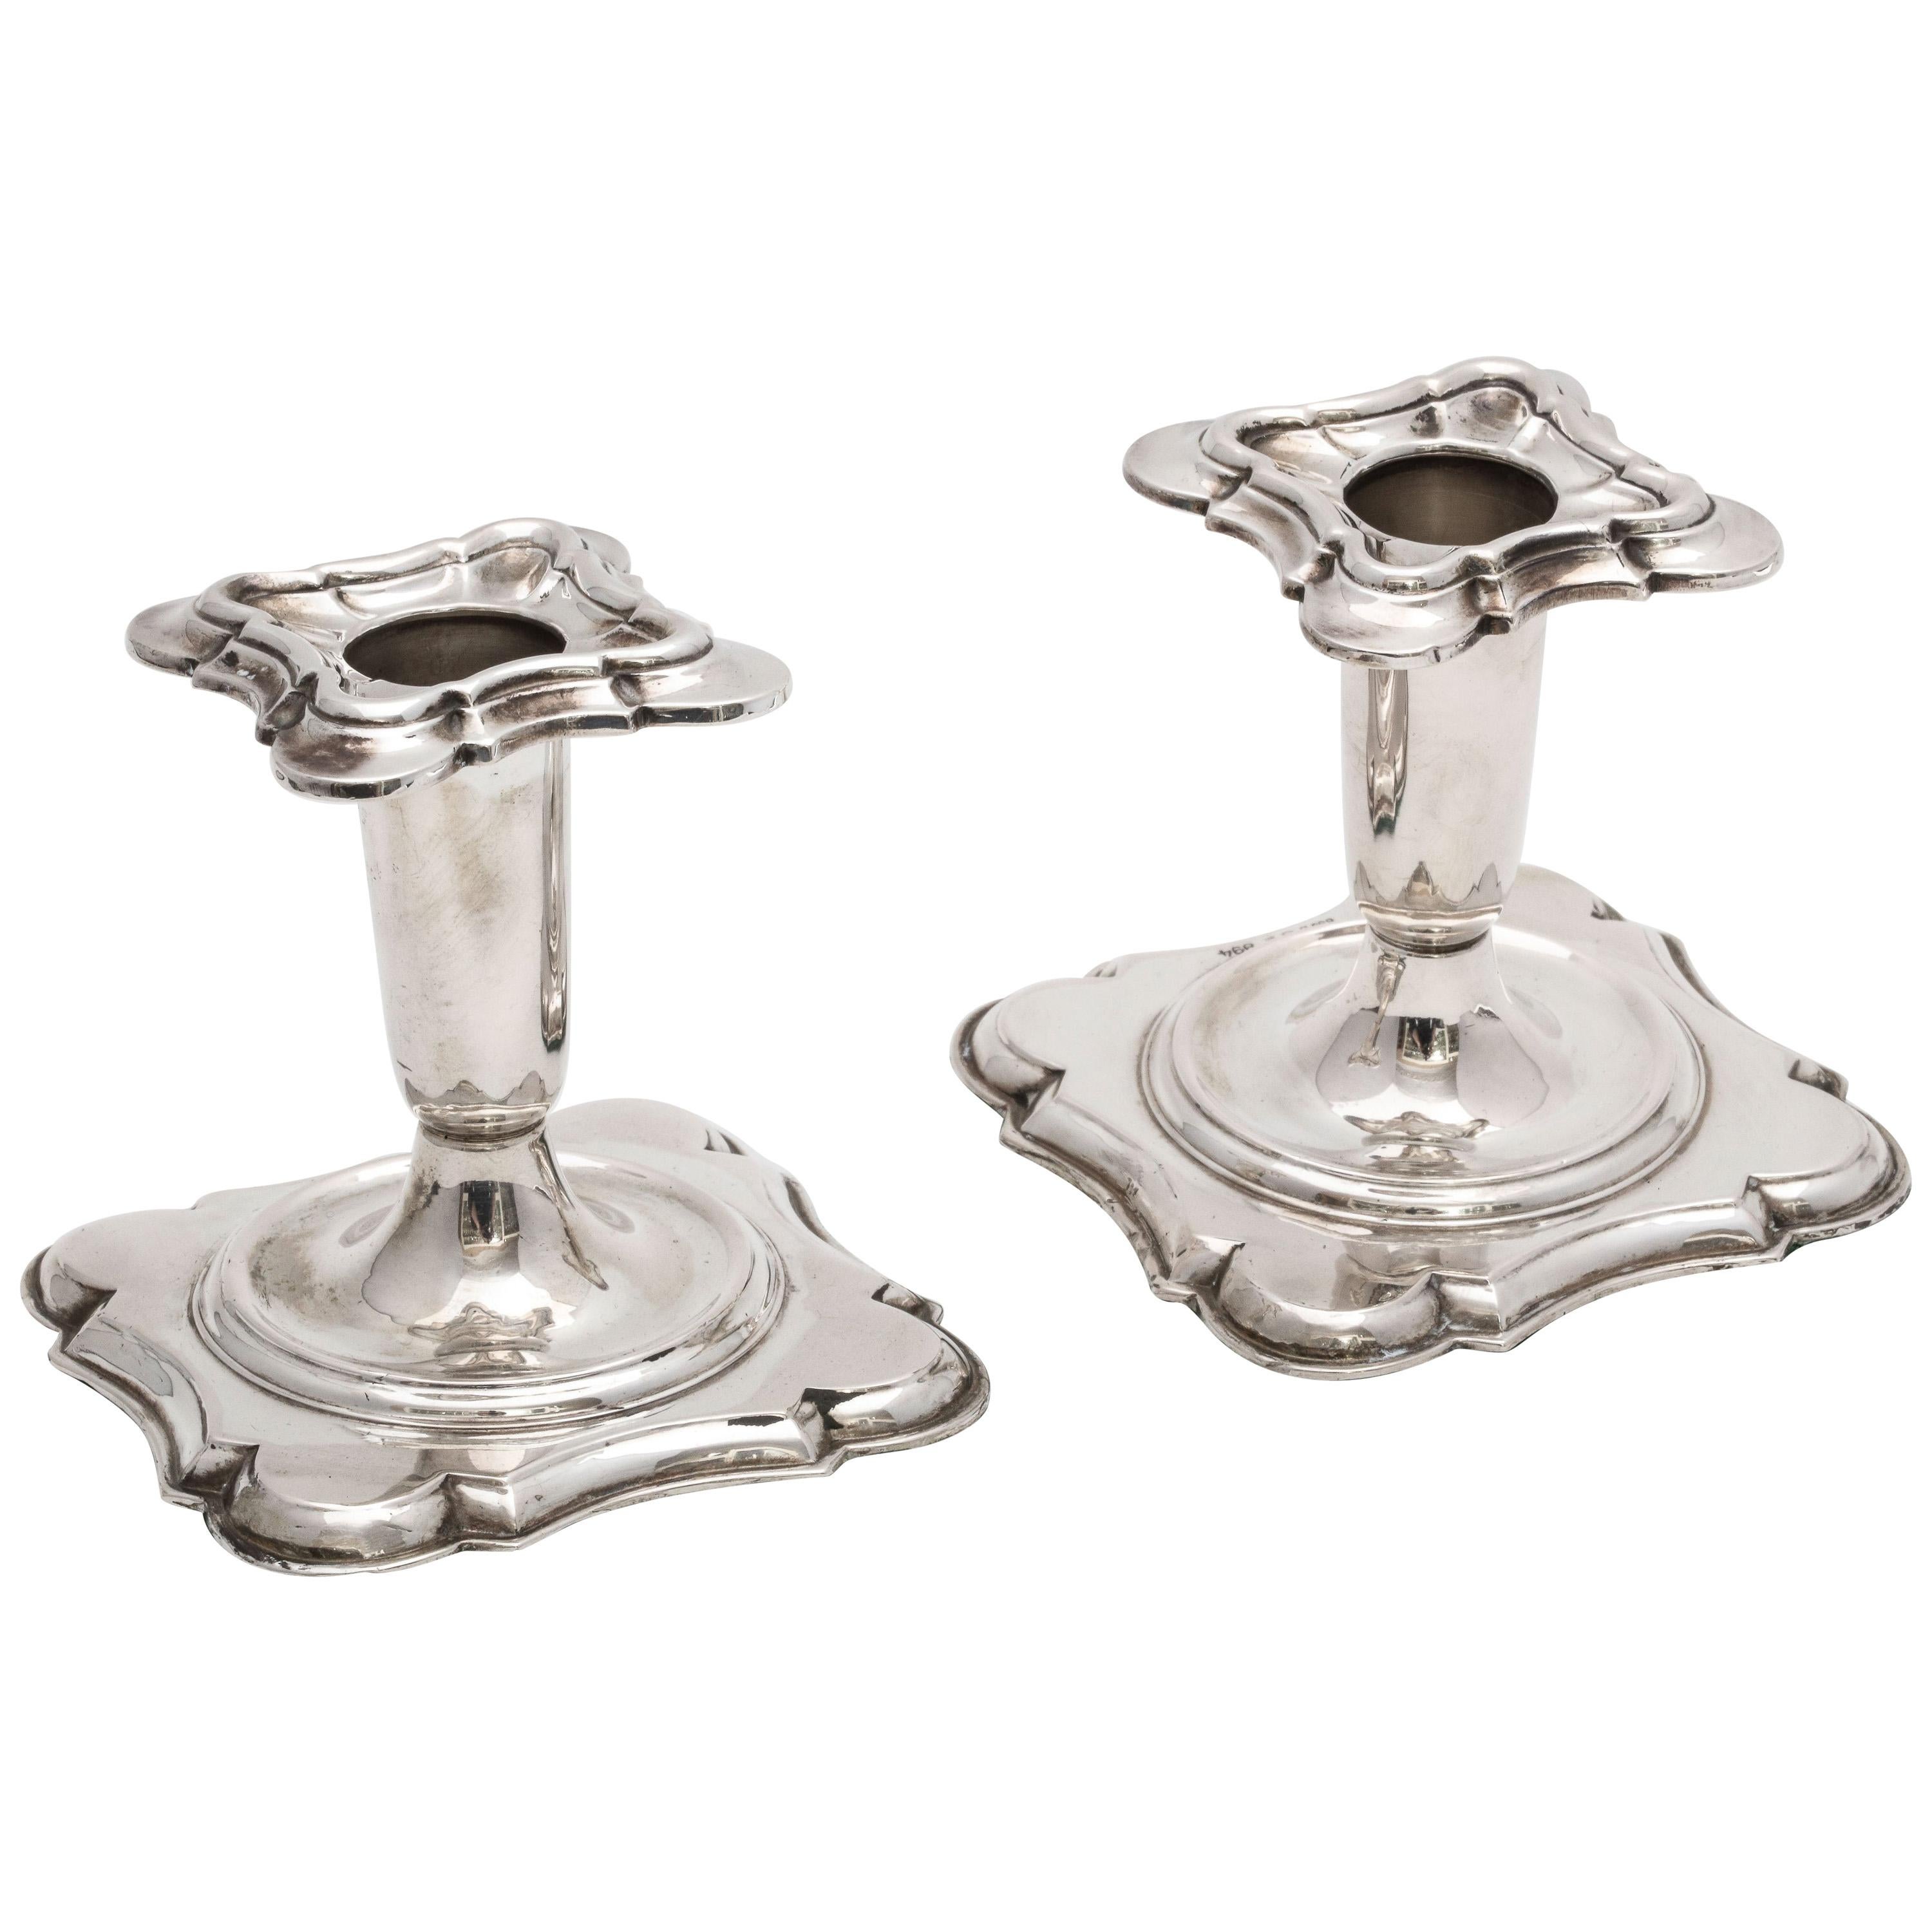 Pair of Continental Silver '.835' Norwegian Candlesticks by Theodor Olsens